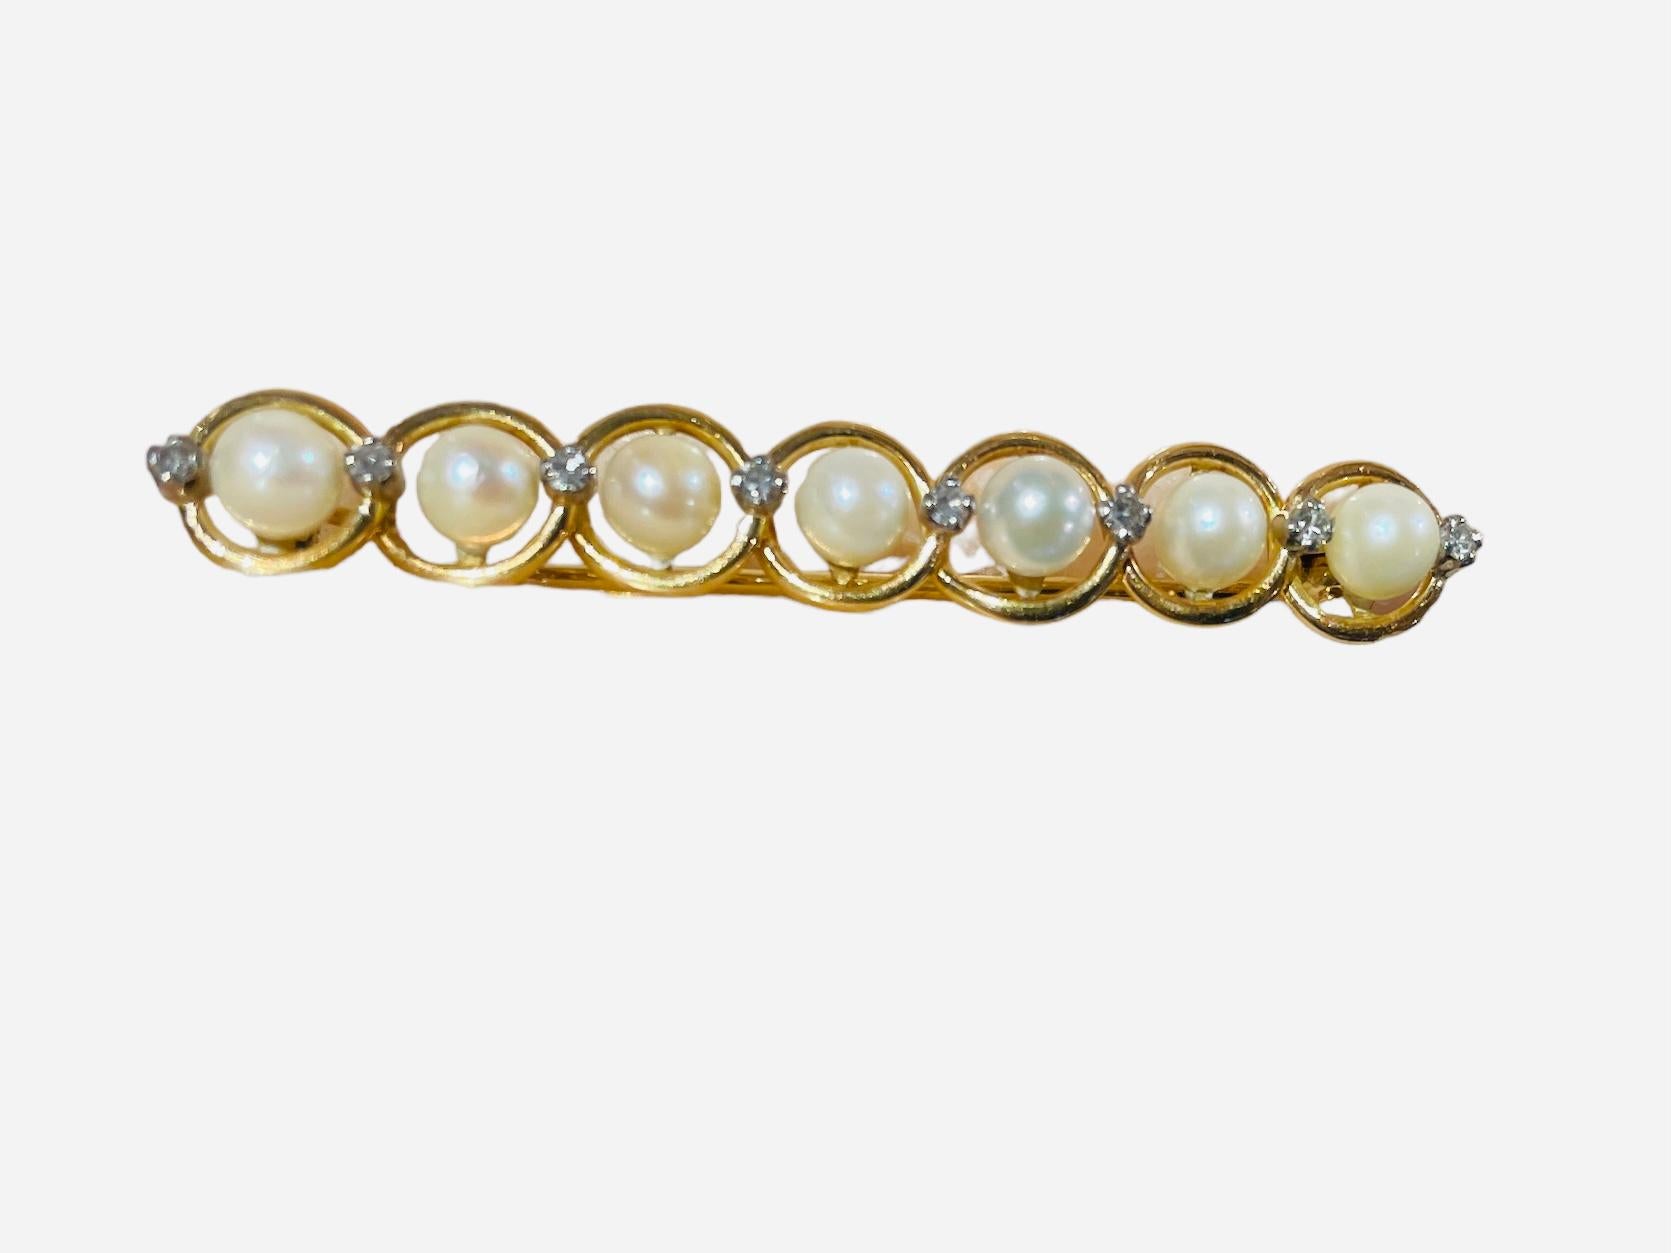 14k Yellow Gold Diamonds and Pearls Bar Brooch In Good Condition For Sale In Guaynabo, PR